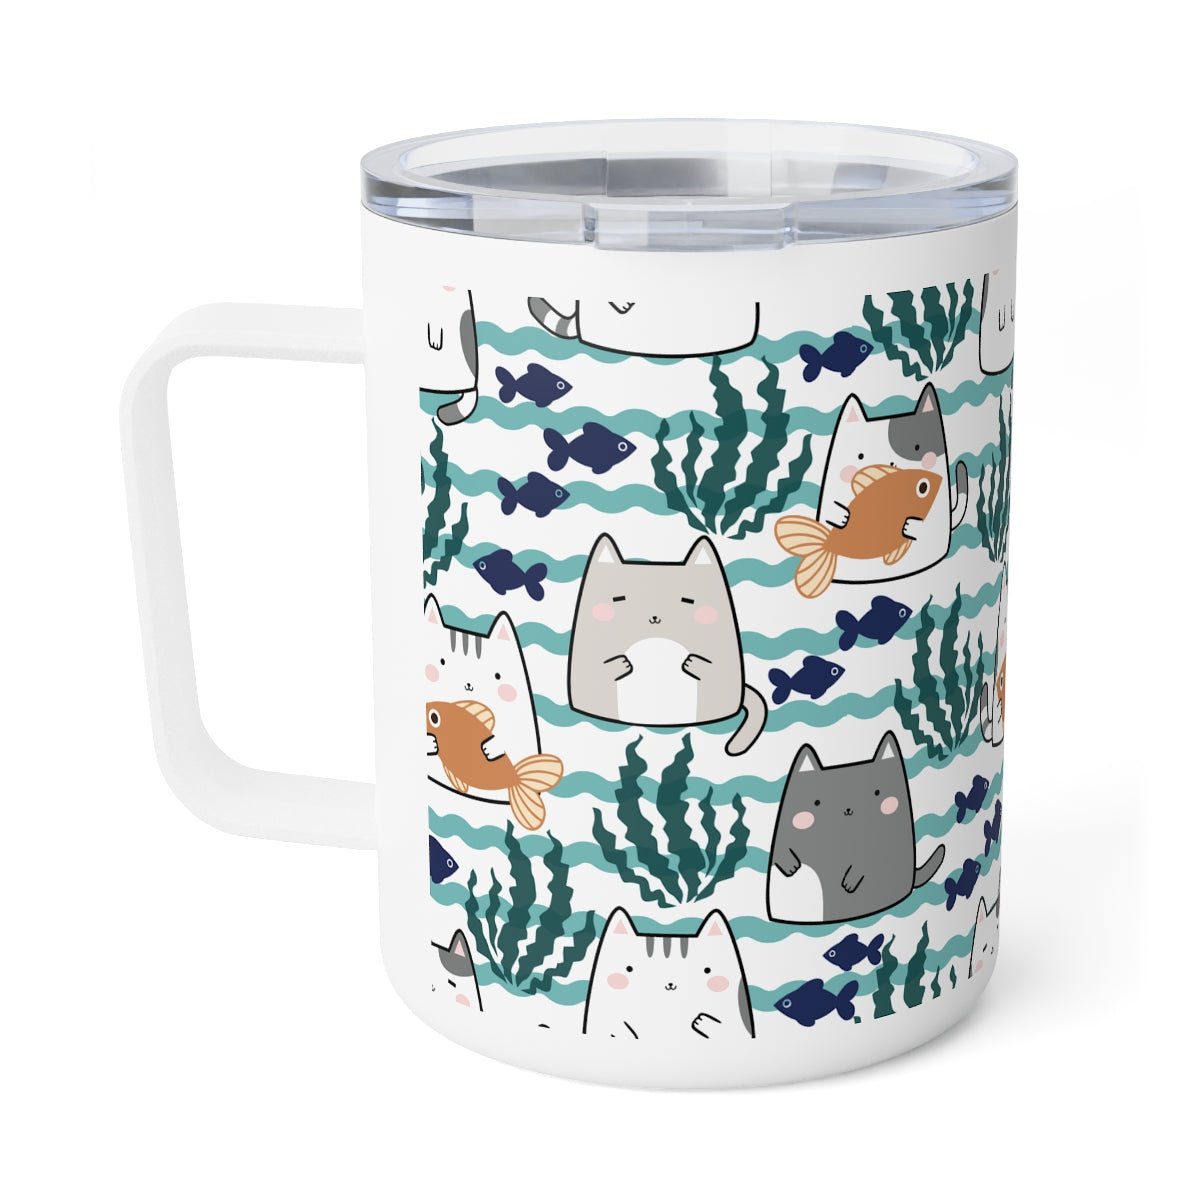 Kawaii Cats and Fishes Insulated Coffee Mug - Puffin Lime